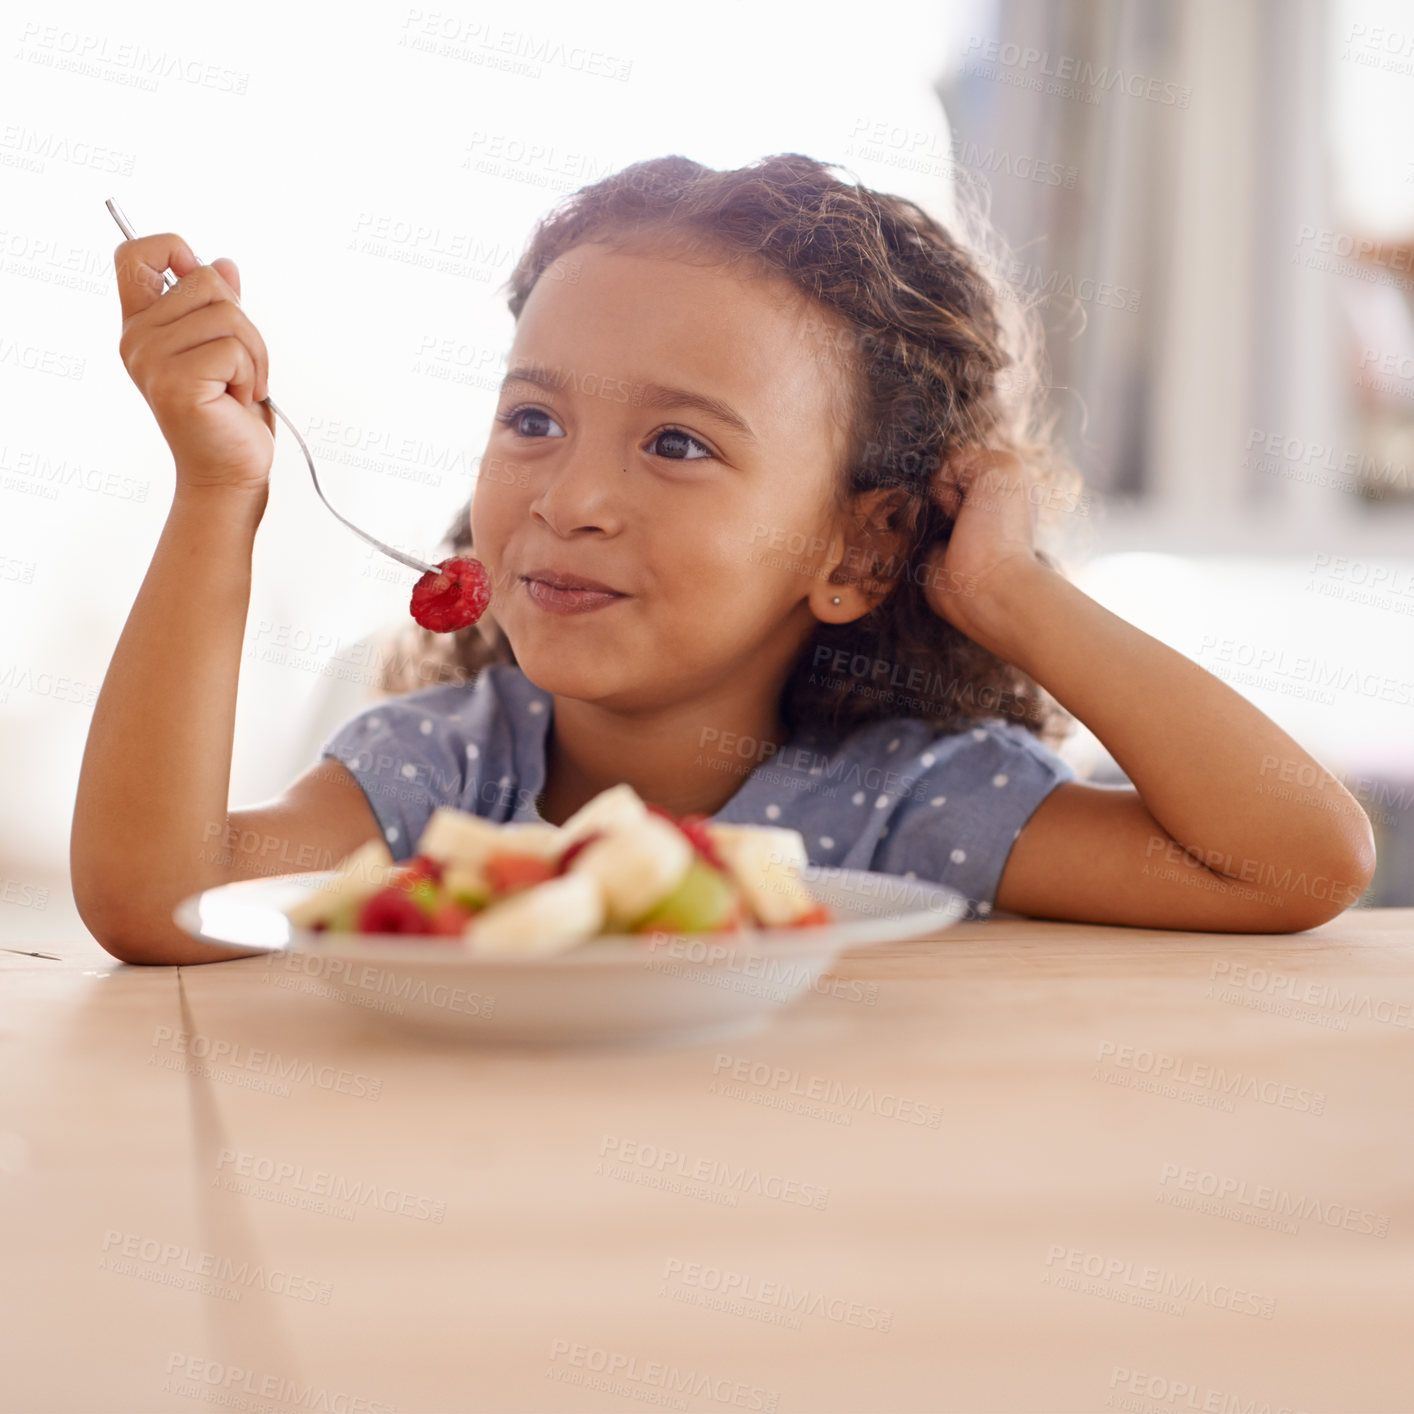 Buy stock photo Shot of a cute little girl eating fruit salad at a table